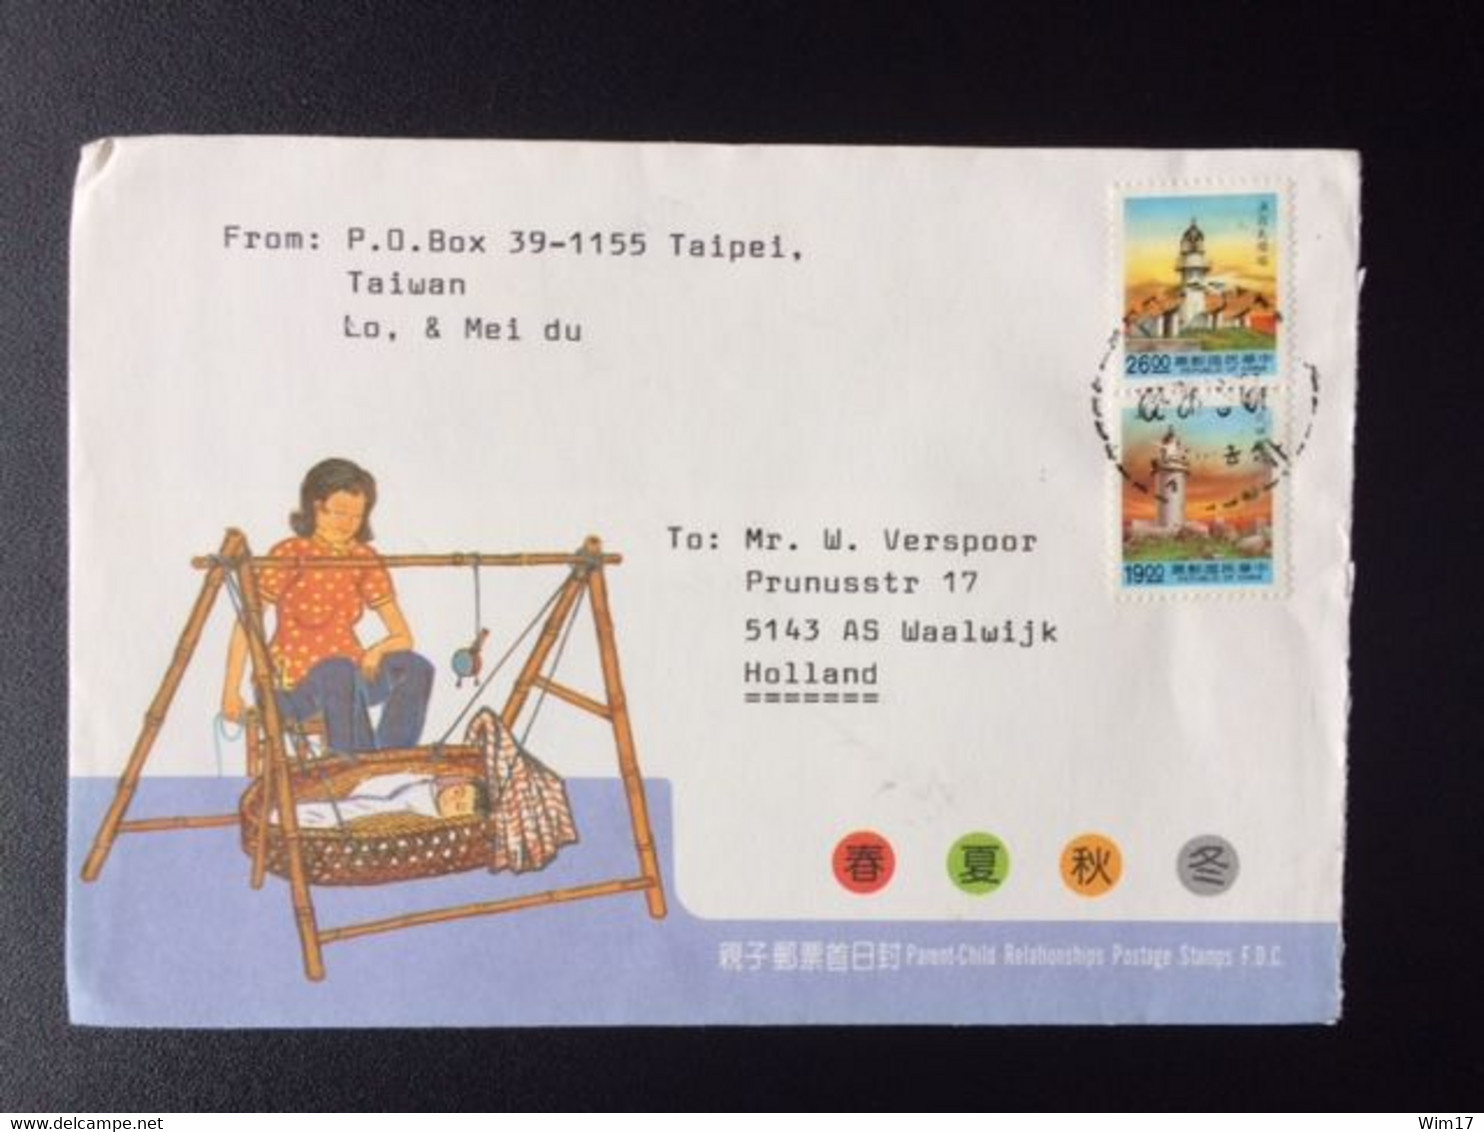 TAIWAN 1985 AIR MAIL LETTER LIGHTHOUSE - Entiers Postaux